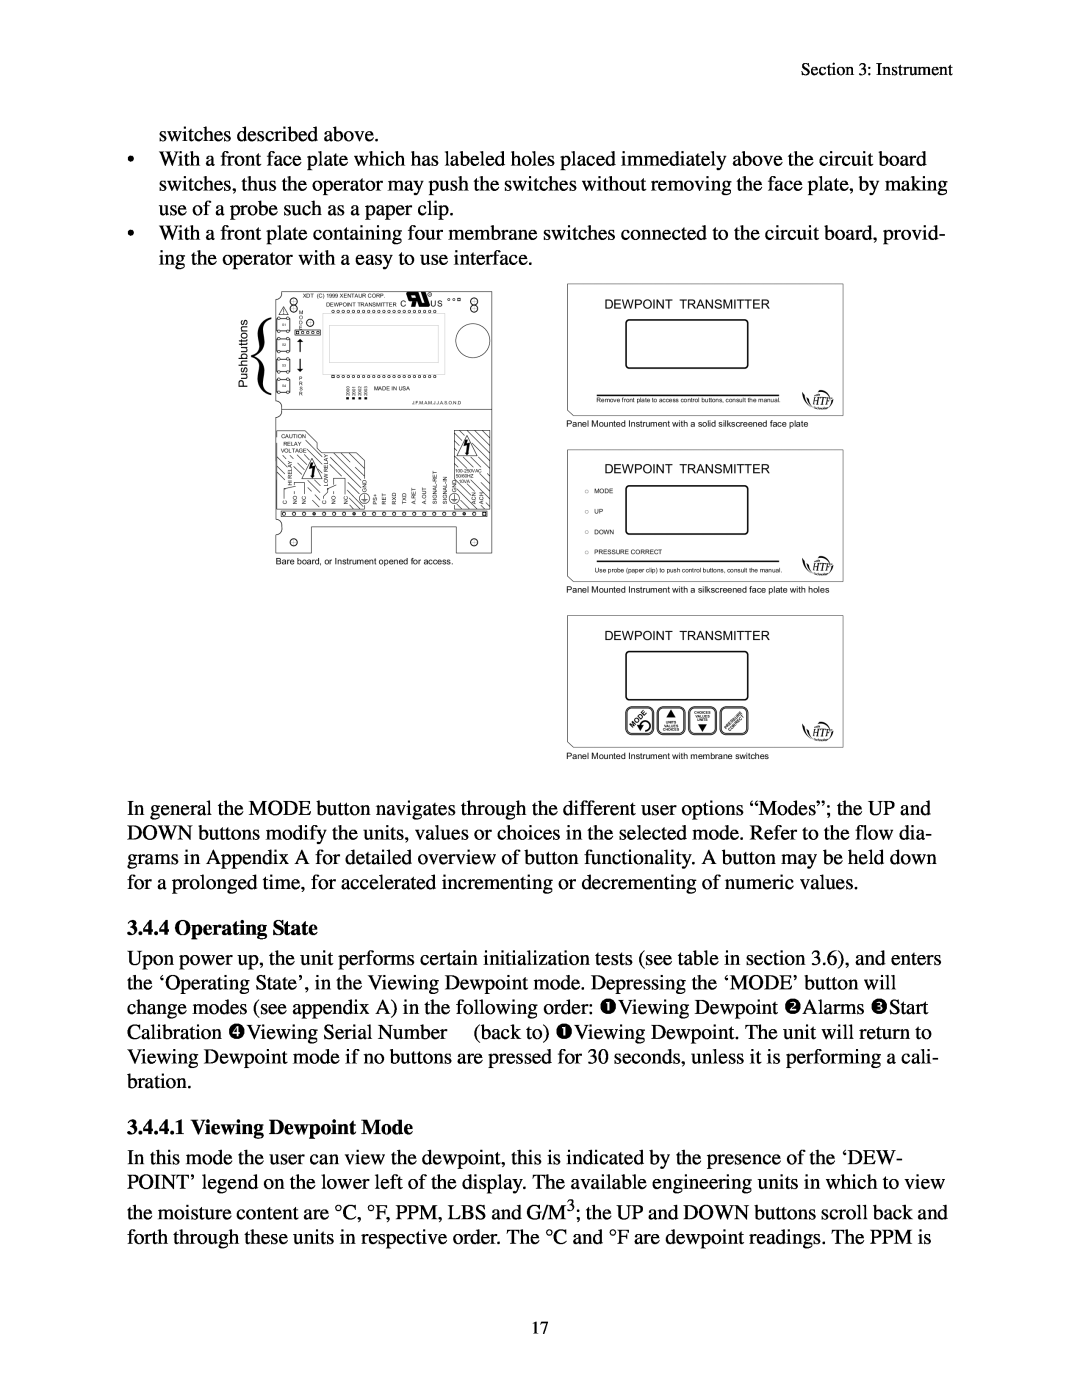 Epson XDT manual Operating State, Viewing Dewpoint Mode 